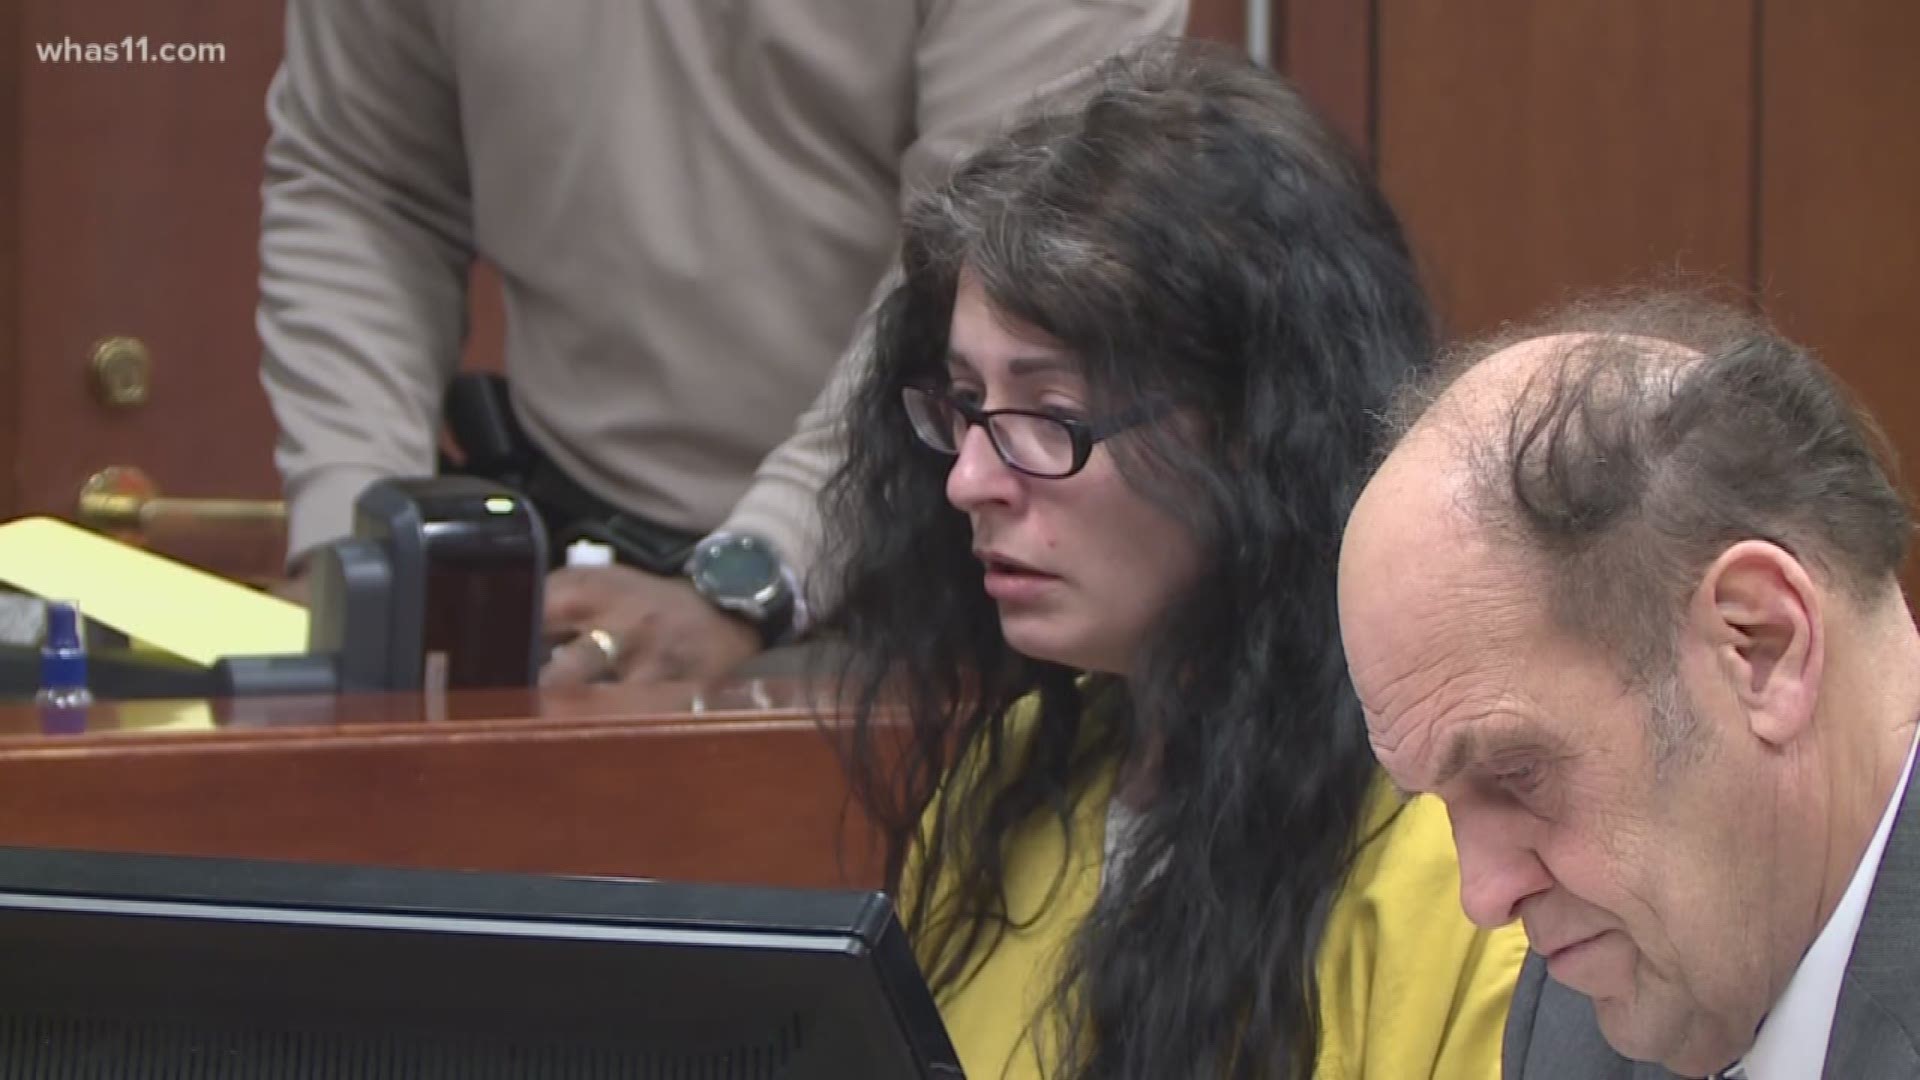 Louisville woman accused of murderforhire found not guilty